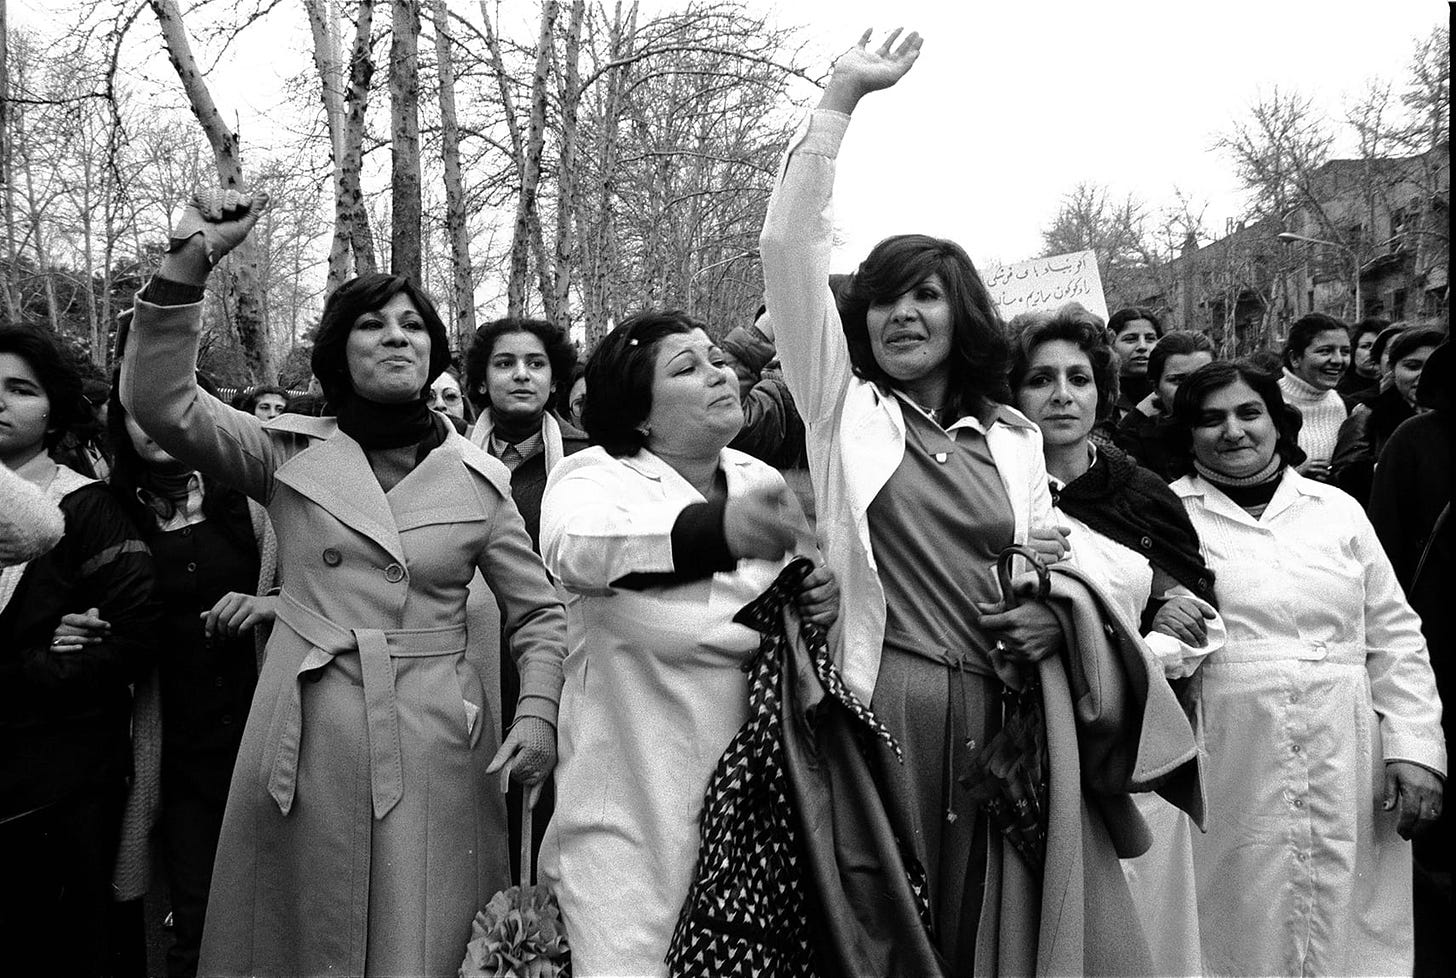 Women's protests in Iran have long history - The Washington Post